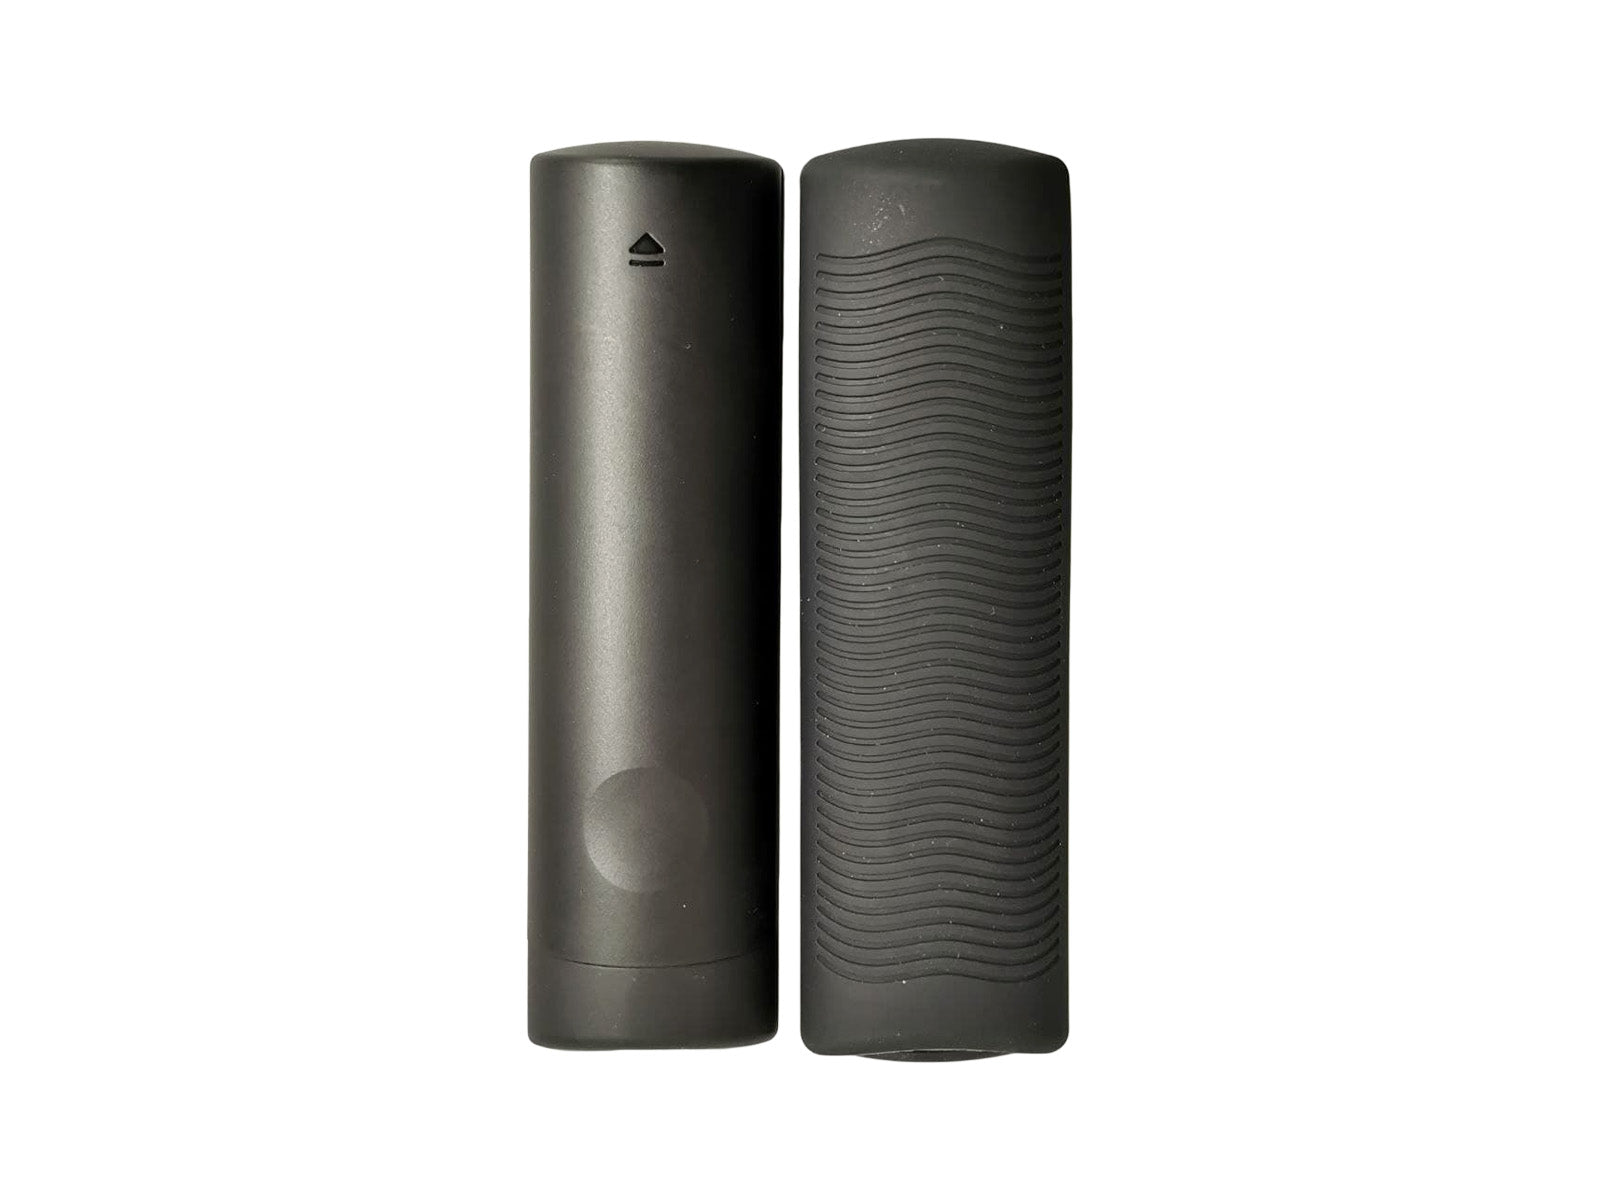 Alexa Voice Remote And Cover Back View